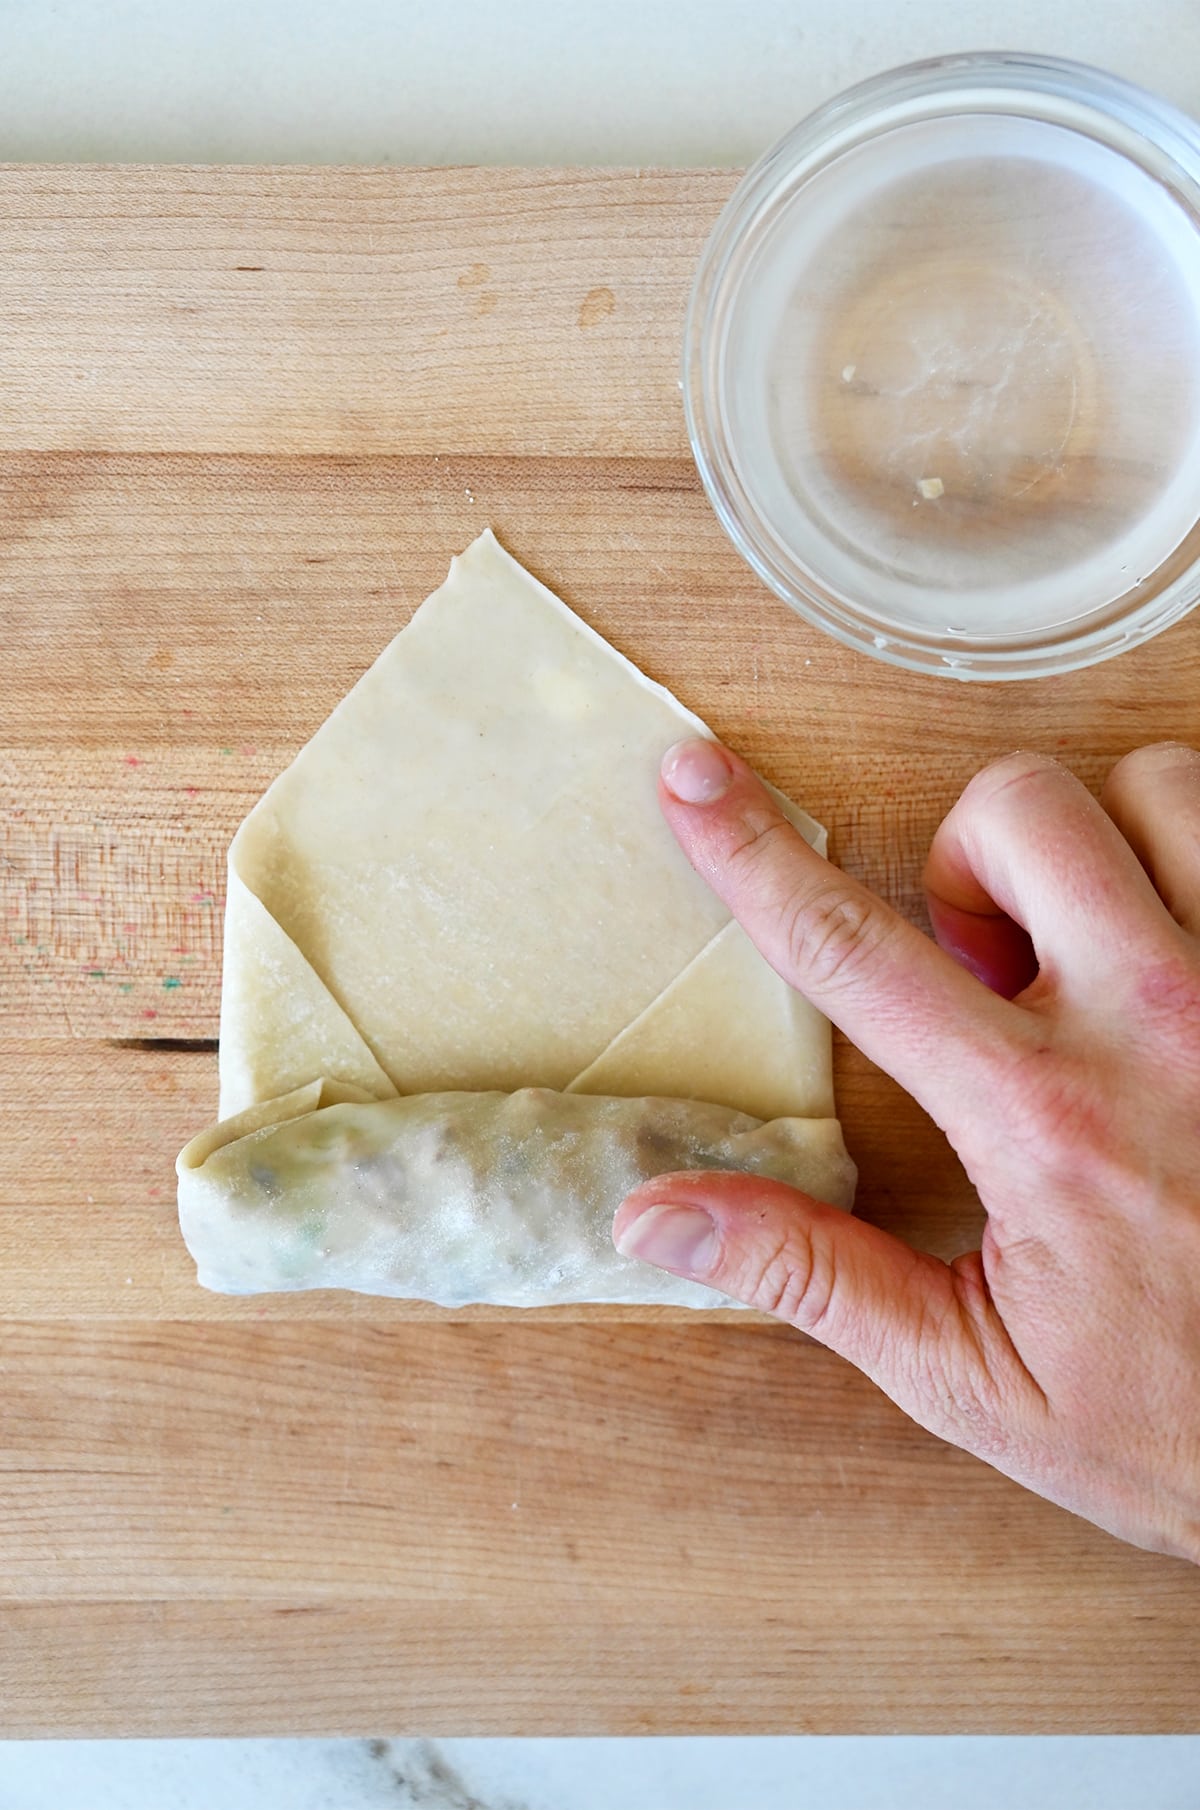 Step 4 in assembling a spring roll: Rolling the wrapper upwards and securing the edge with a little bit of water.